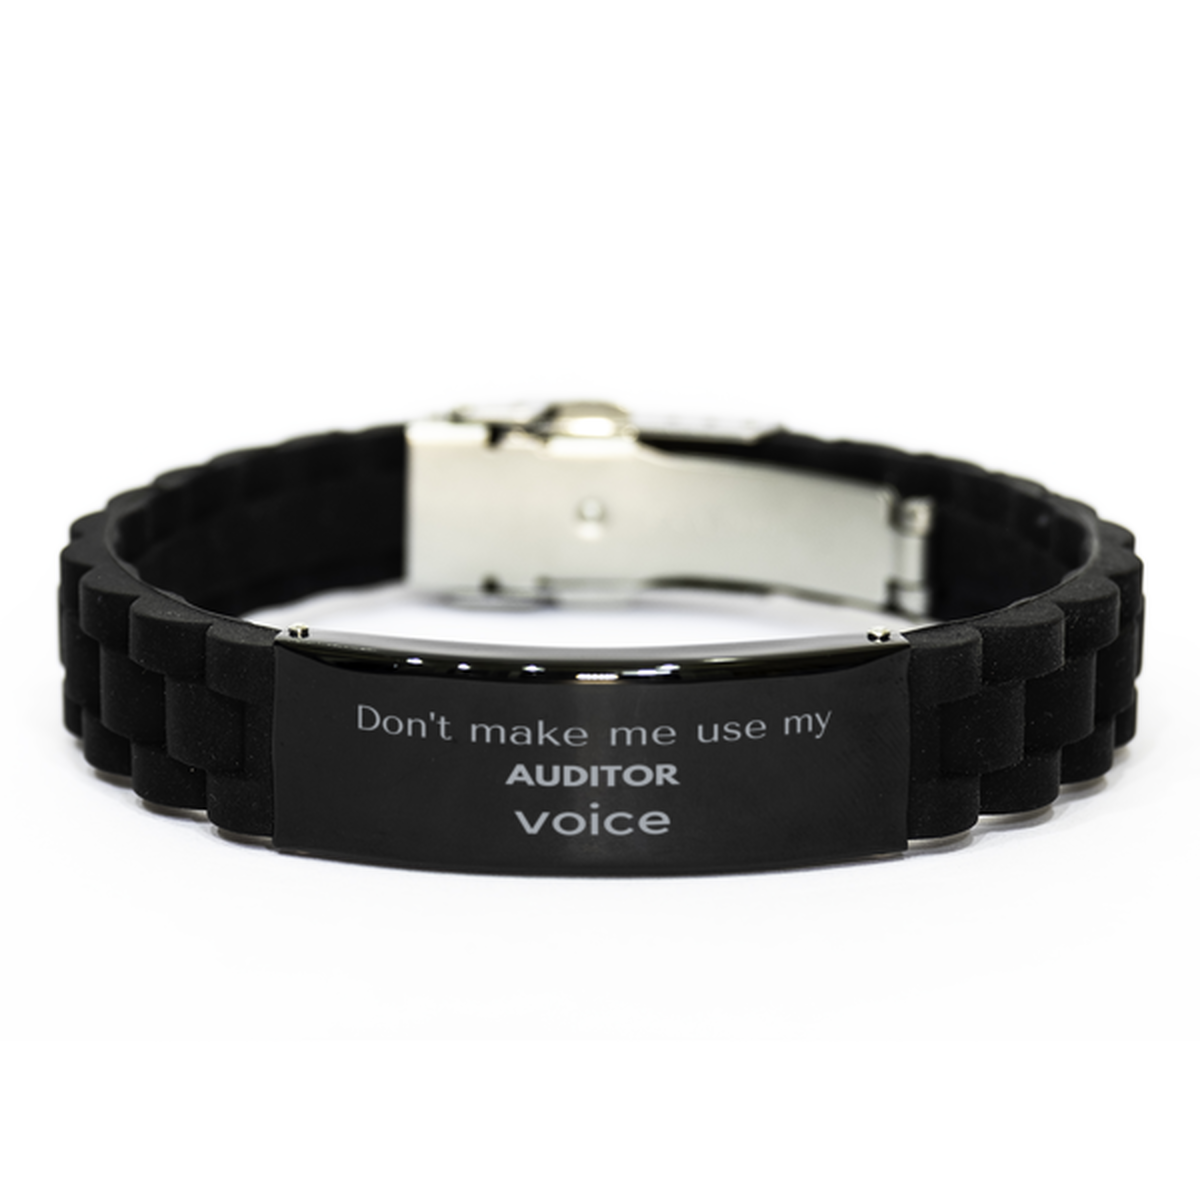 Don't make me use my Auditor voice, Sarcasm Auditor Gifts, Christmas Auditor Black Glidelock Clasp Bracelet Birthday Unique Gifts For Auditor Coworkers, Men, Women, Colleague, Friends